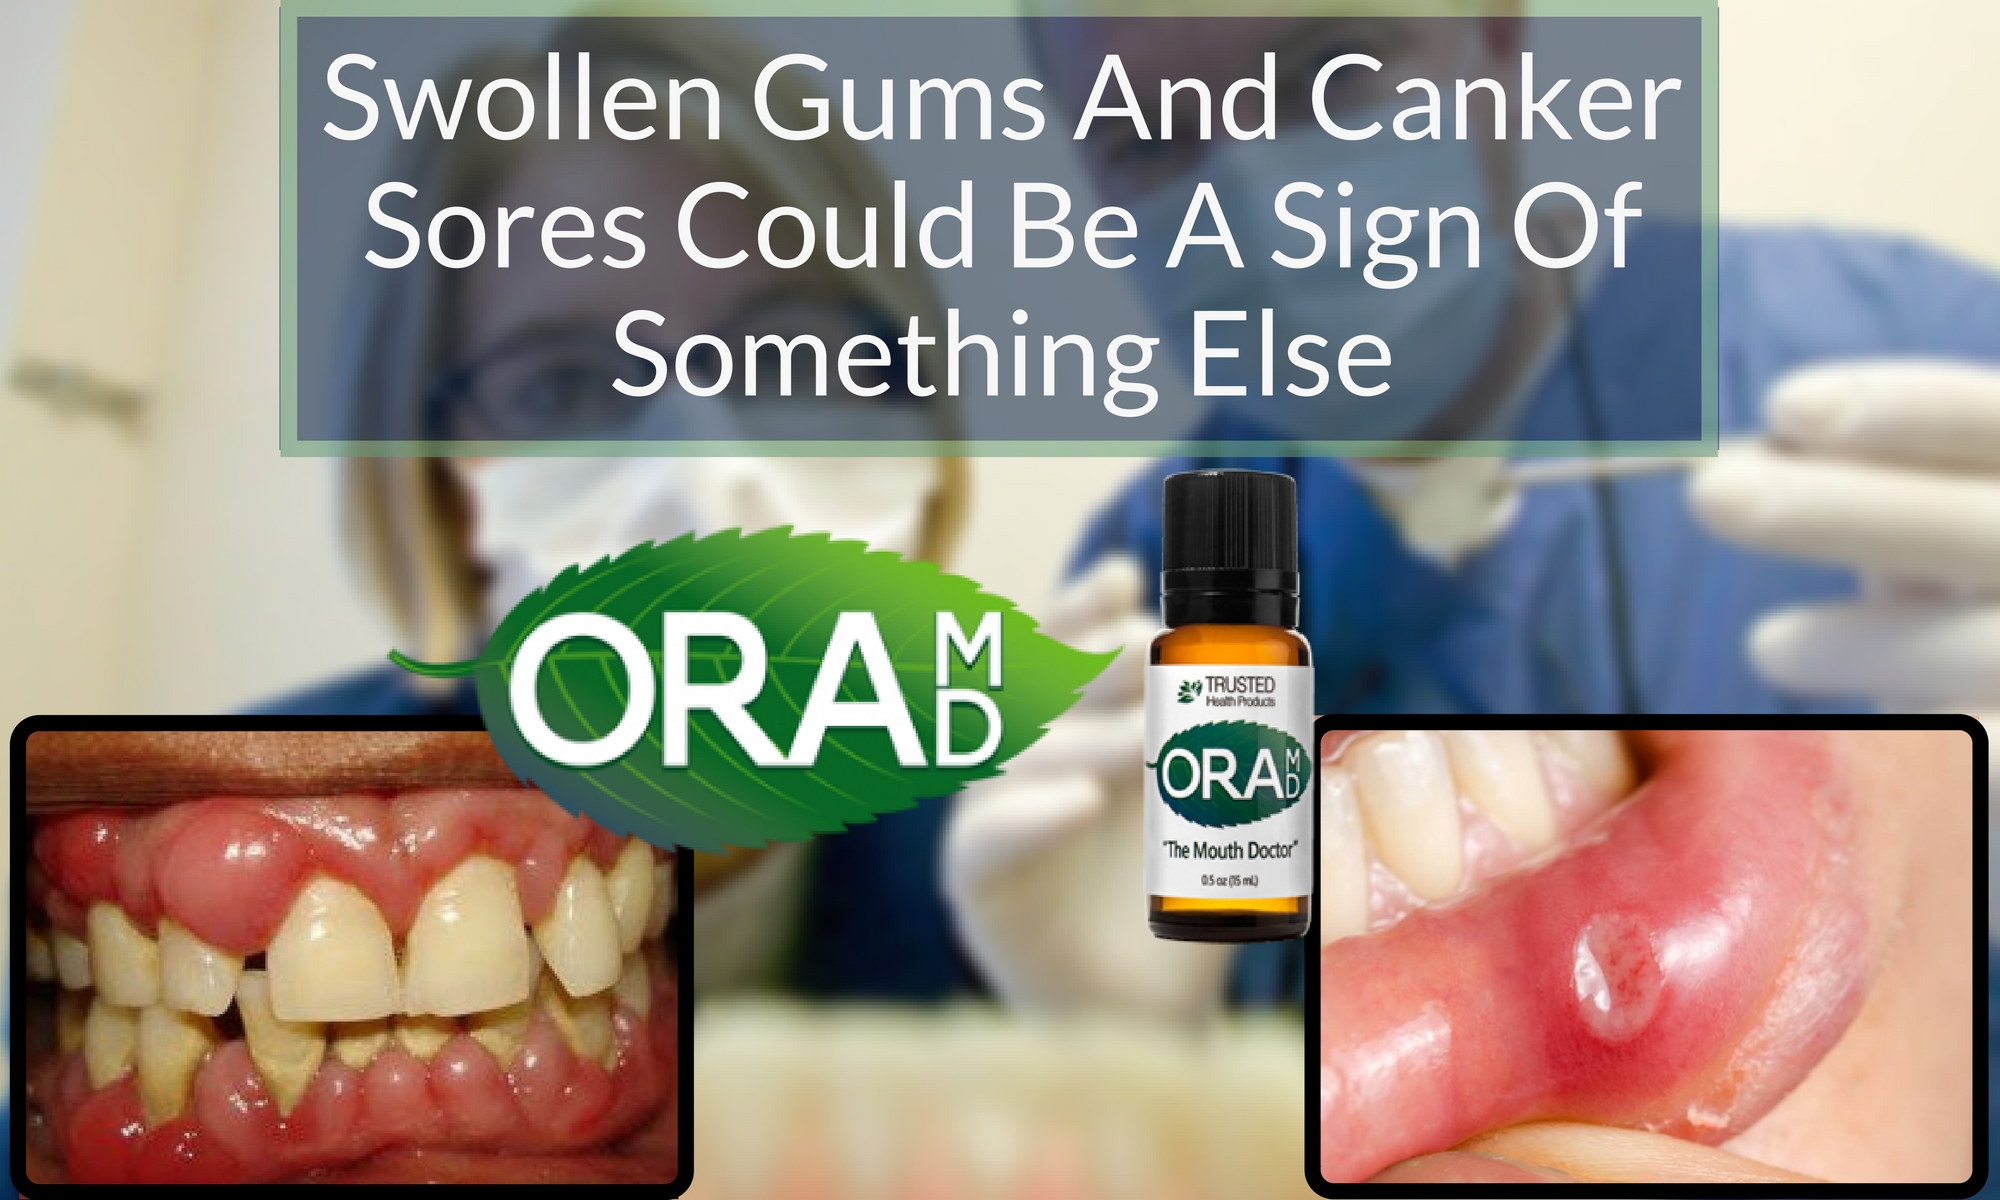 Swollen Gums And Canker Sores Could Be A Sign Of Something Else